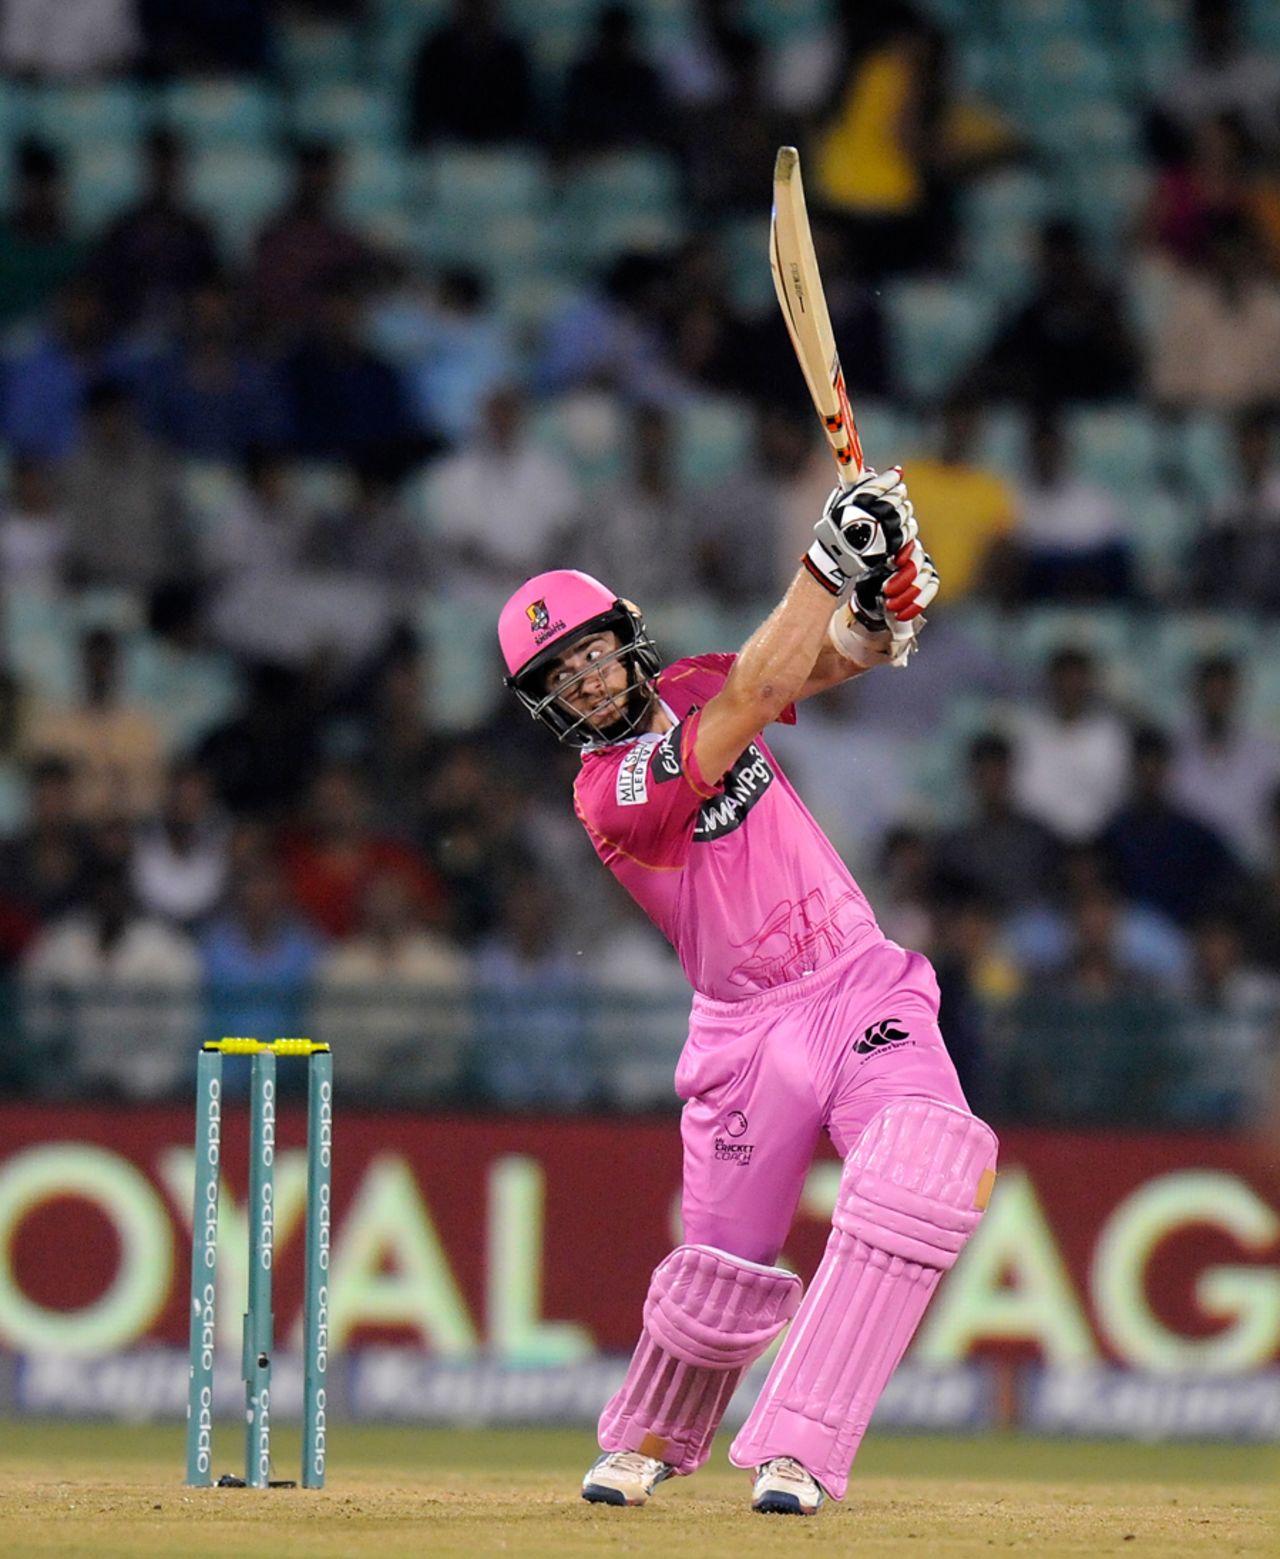 Kane Williamson tees off, Cape Cobras v Northern Knights, Champions League T20, Raipur, September 19, 2014